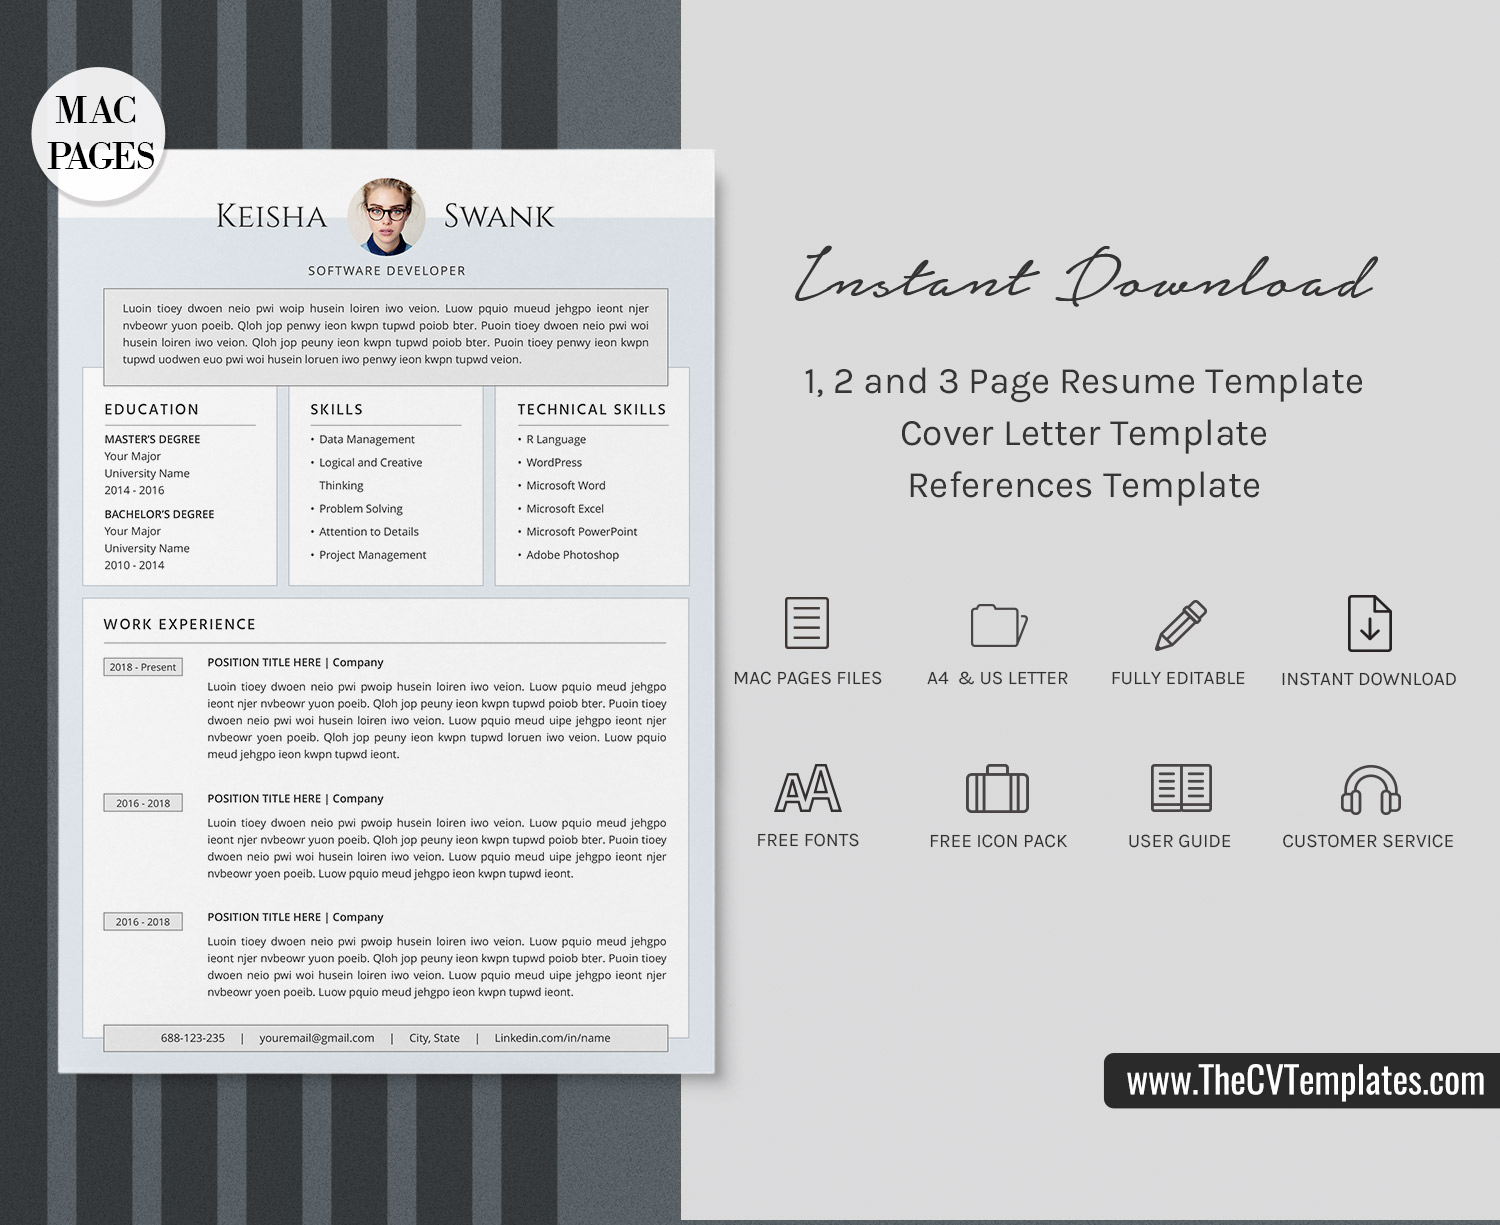 For Mac Pages Creative Resume Template For Job Application Modern Cv Format Curriculum Vitae Professional Resume Editable Resume 1 Page 2 Page 3 Page Resume Instant Download Thecvtemplates Com